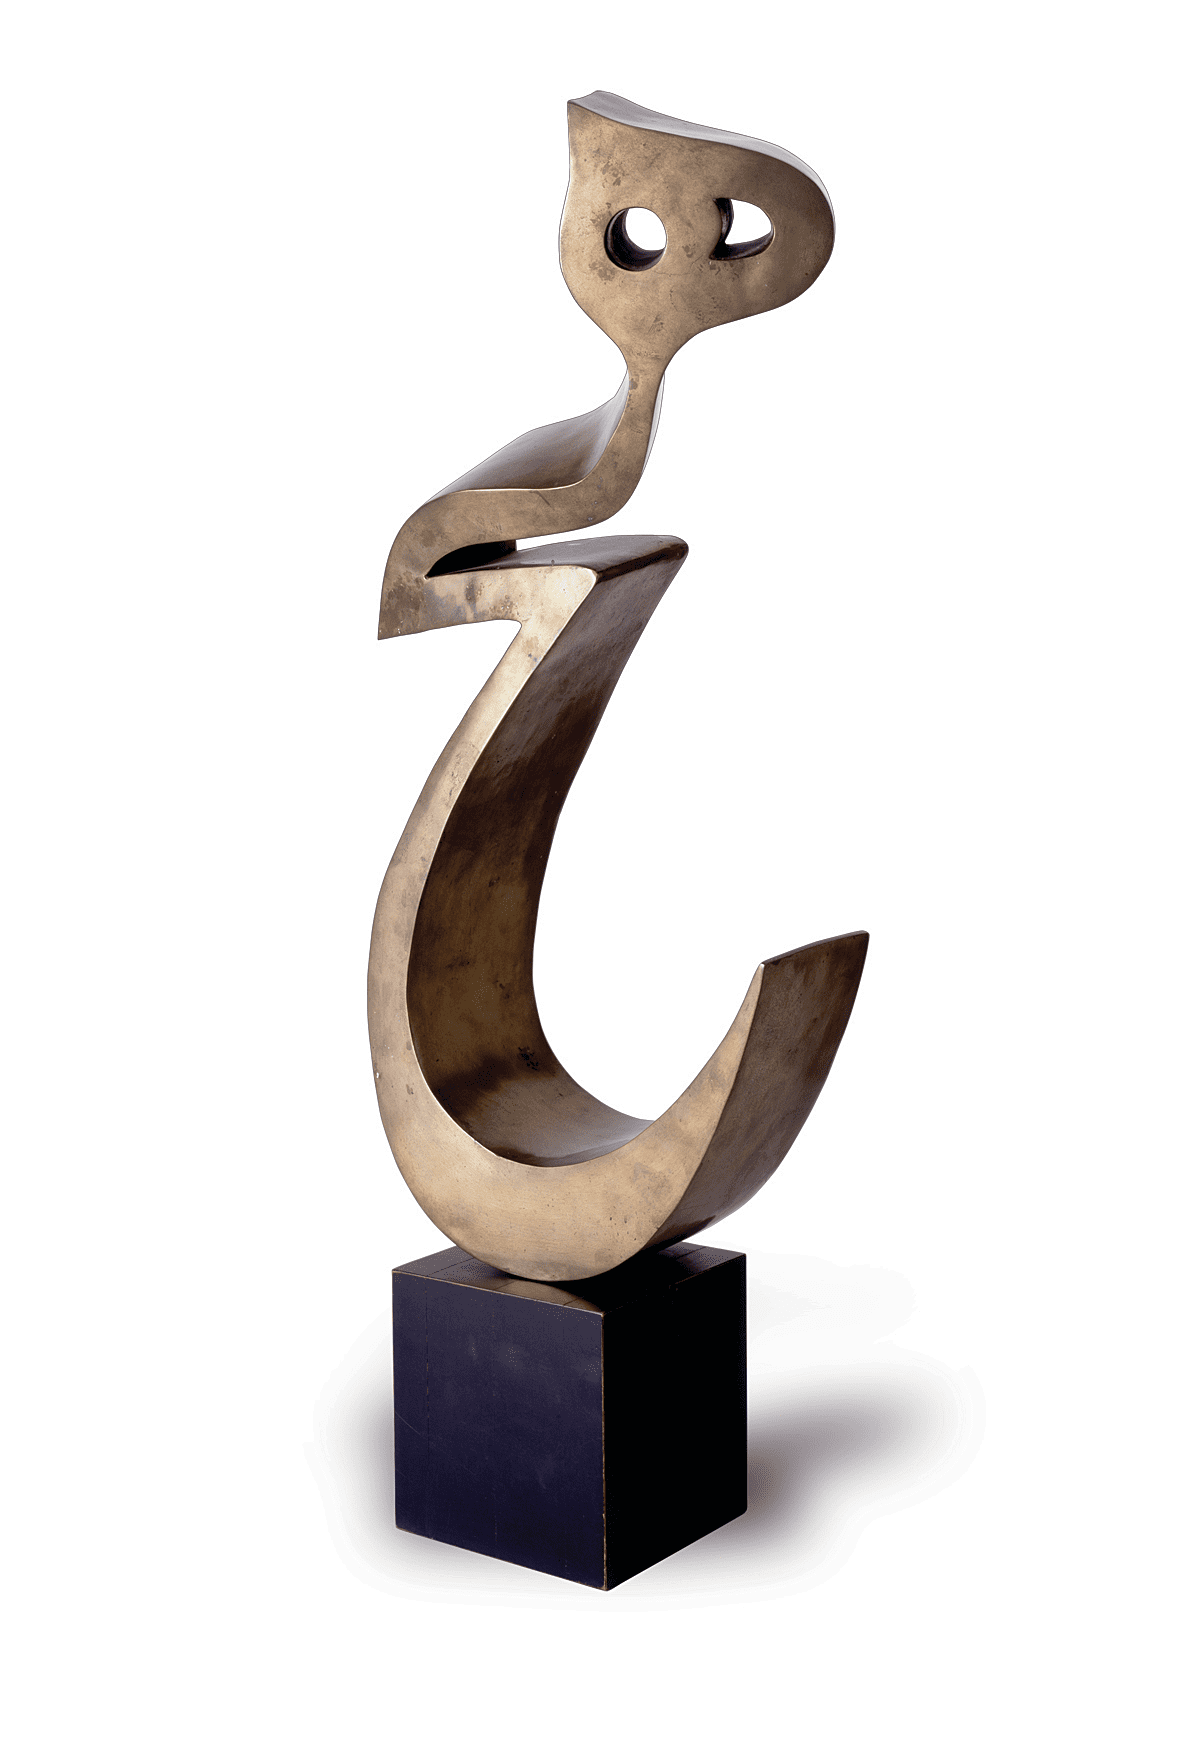 A sculpture of the Arabic character of the word "nothing."